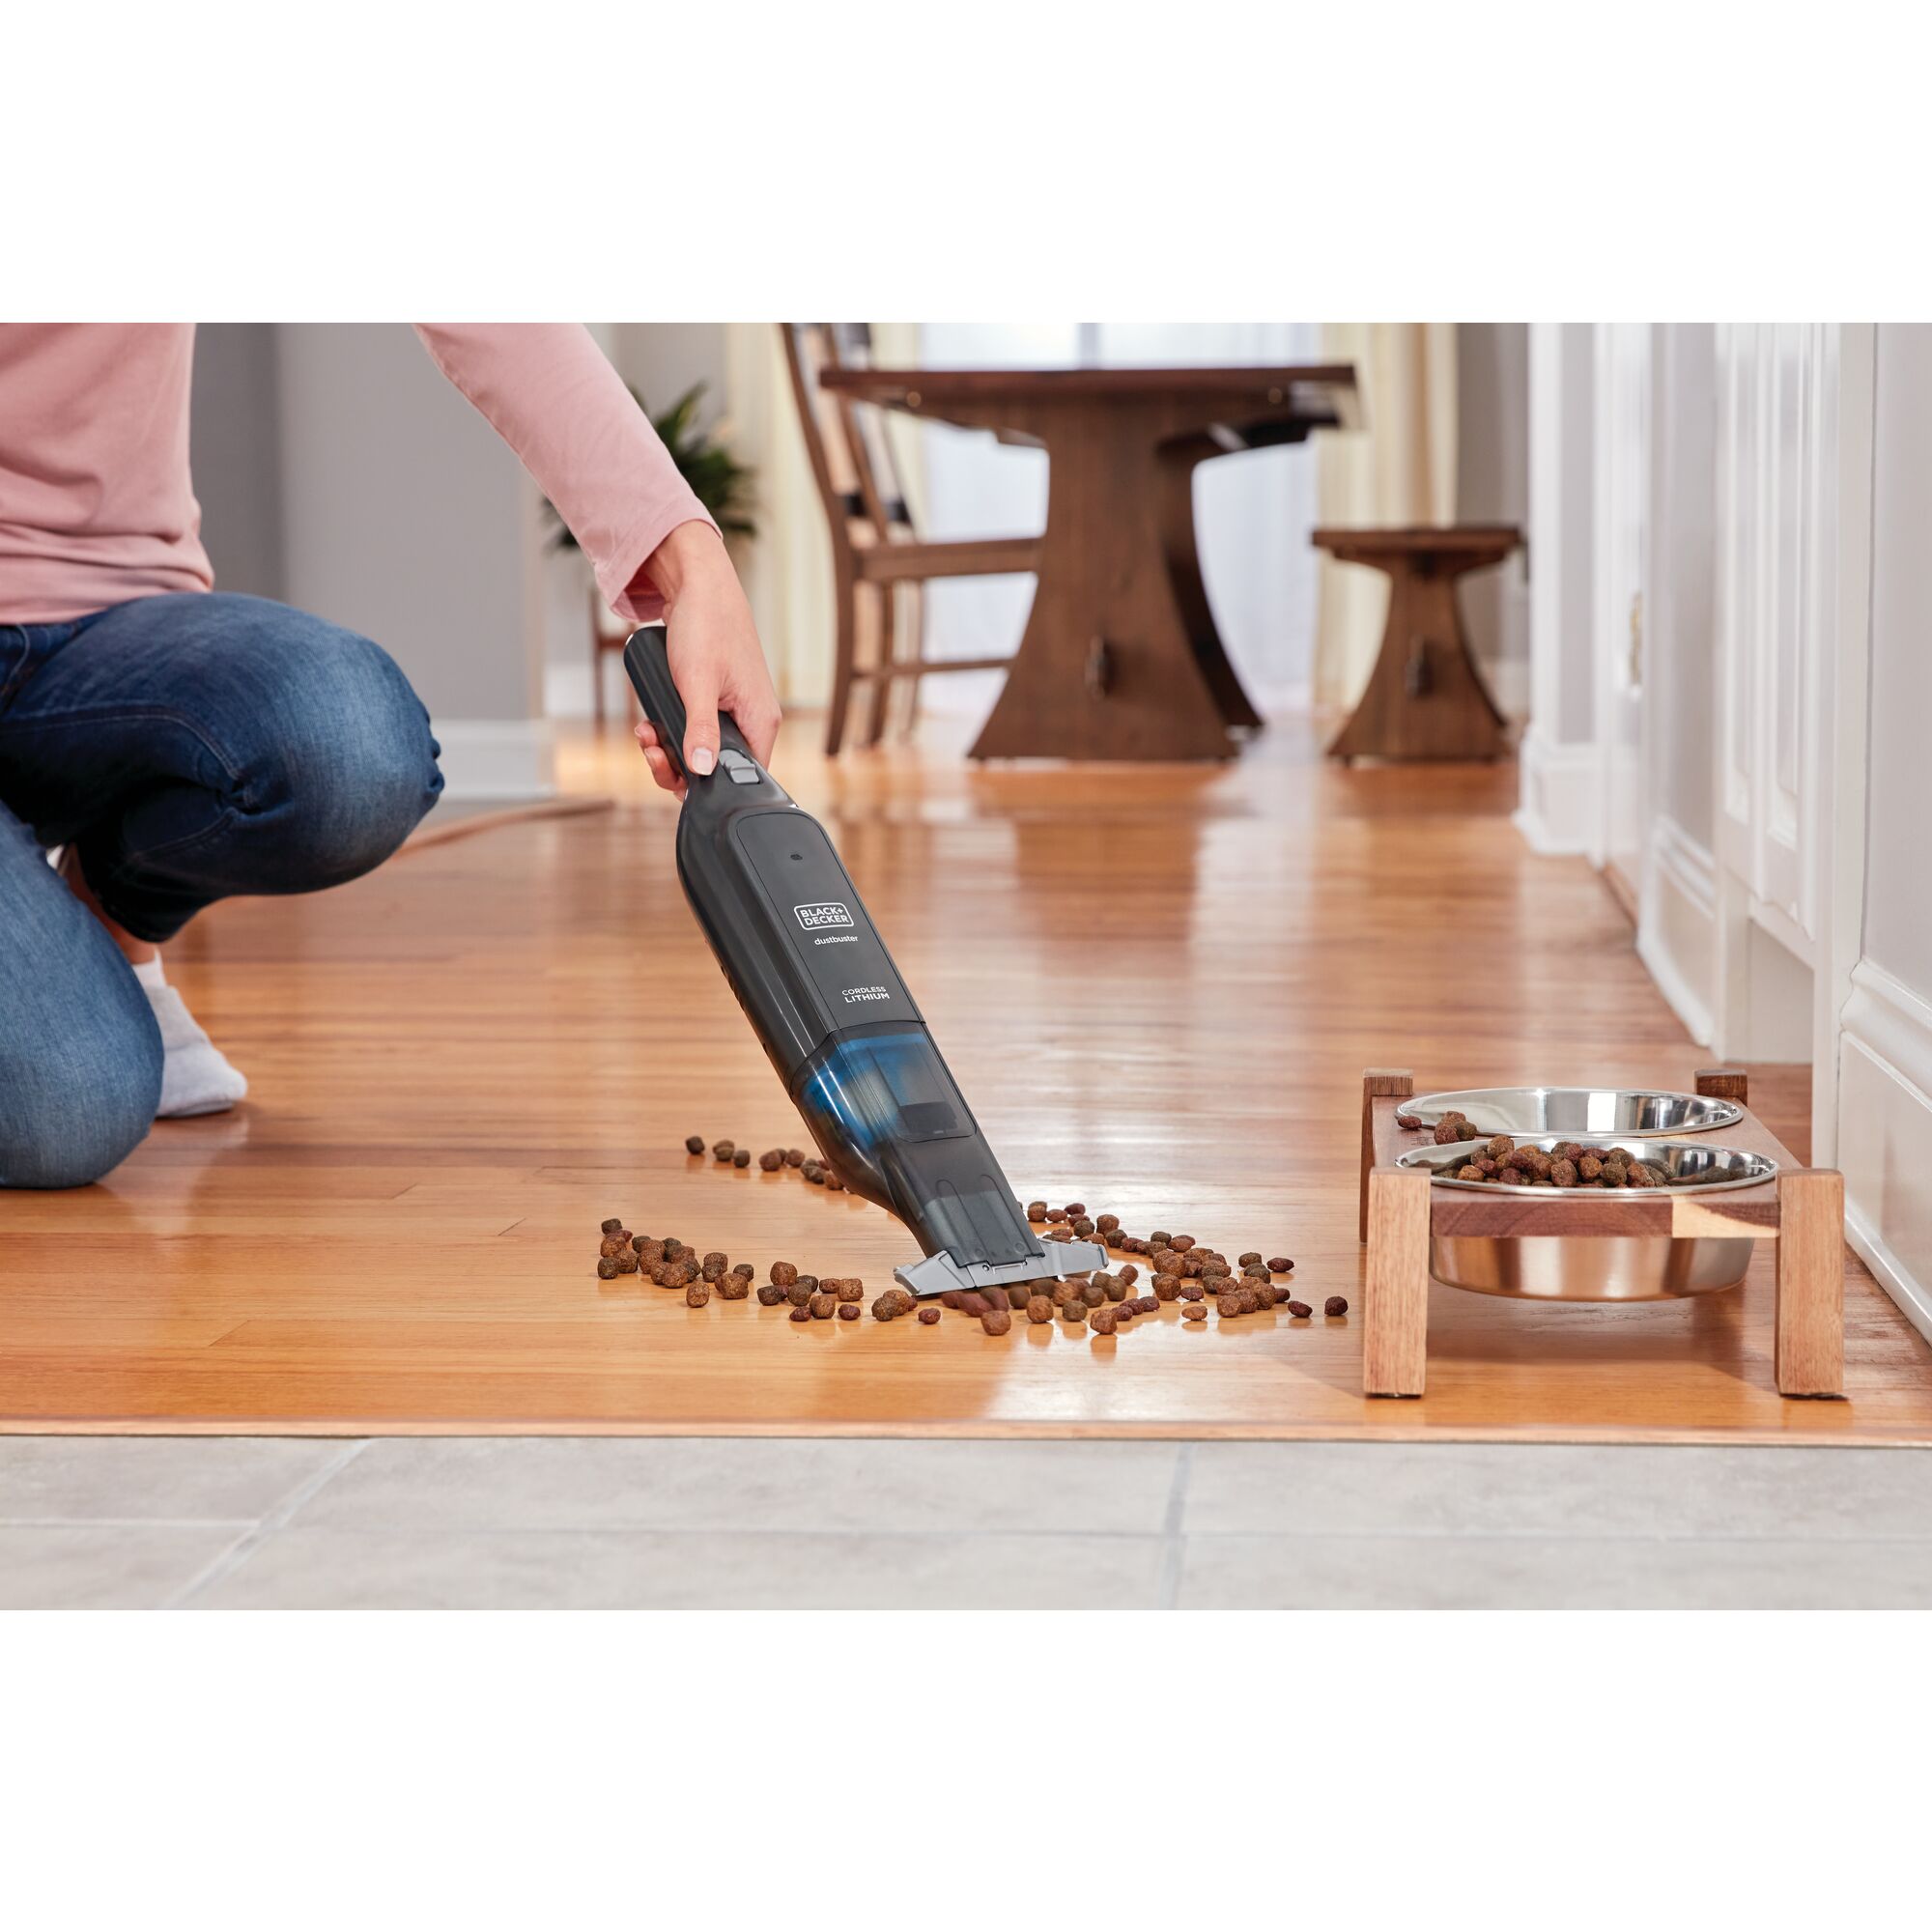 Dustbuster Advanced Clean Cordless Hand Vacuum being used for cleaning pet food from floor.